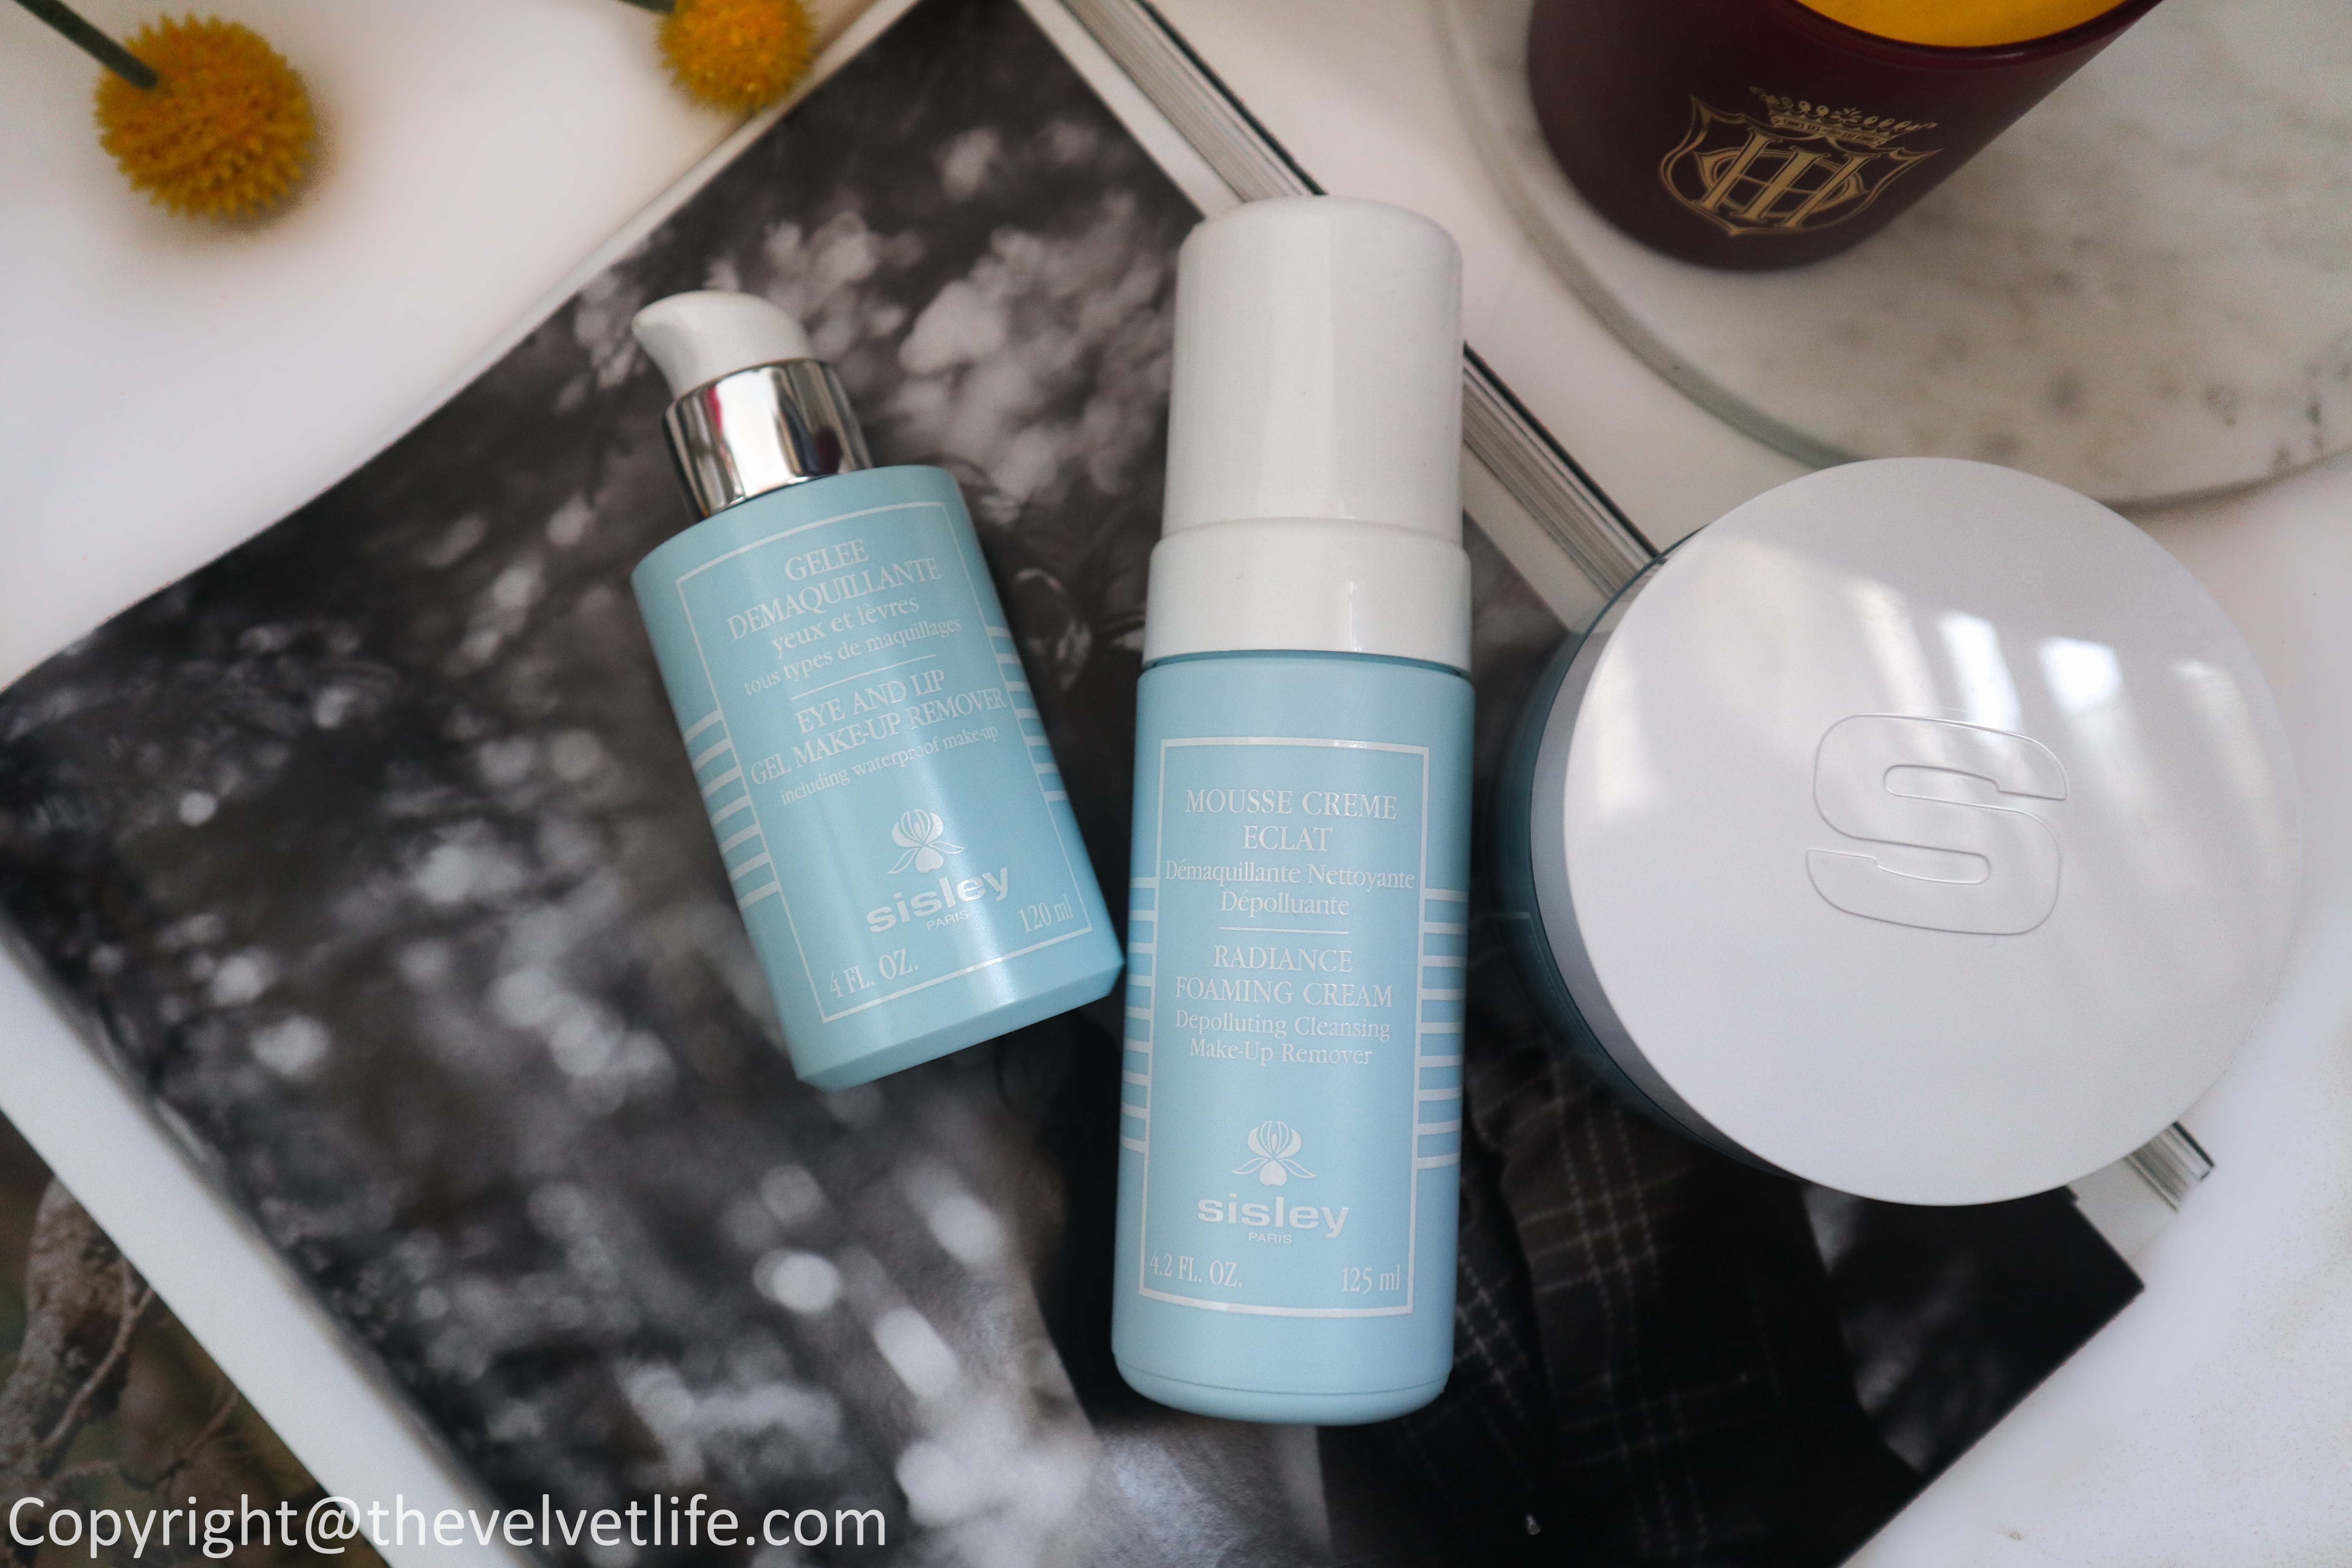 New Sisley Paris Triple-Oil Balm Makeup Remover & Cleanser review of Sisley Paris Eye and Lip Gel Makeup Remover, Radiance Foaming Cream Cleanser